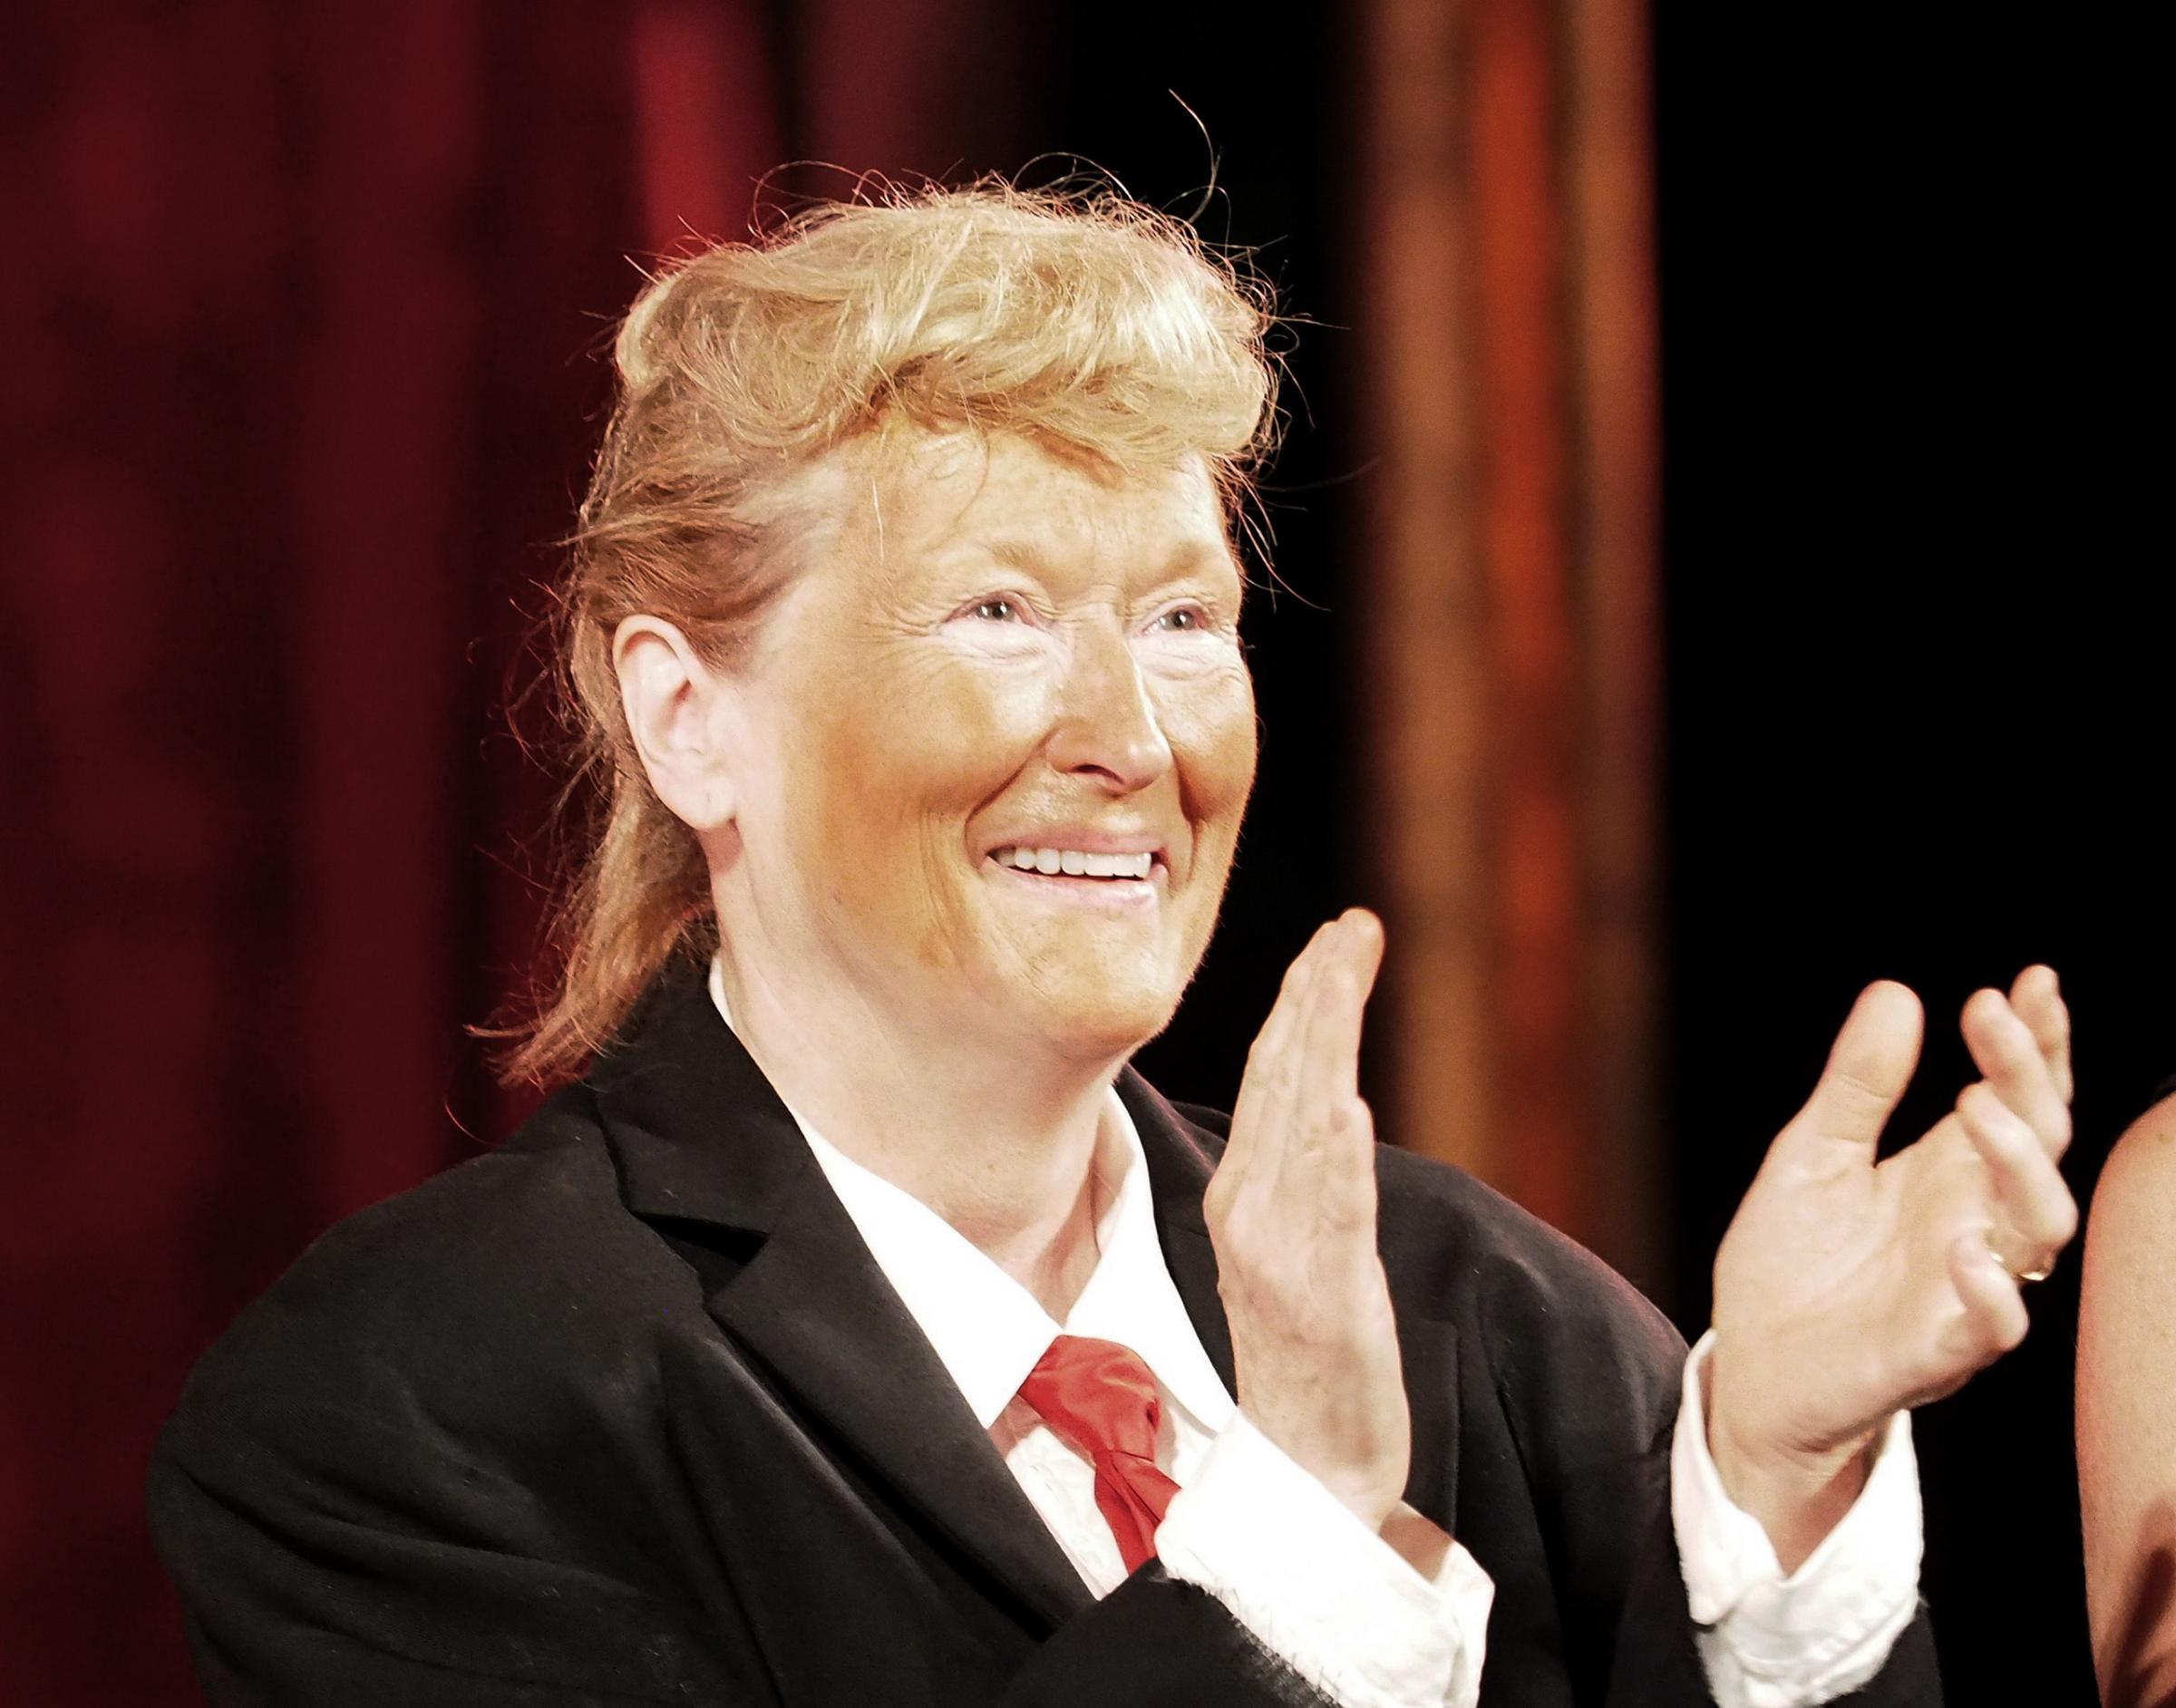 Meryl Streep, dressed as Donald Trump, performs onstage at the 2016 Public Theater Gala at Delacorte Theater in New York City on June 6, 2016.